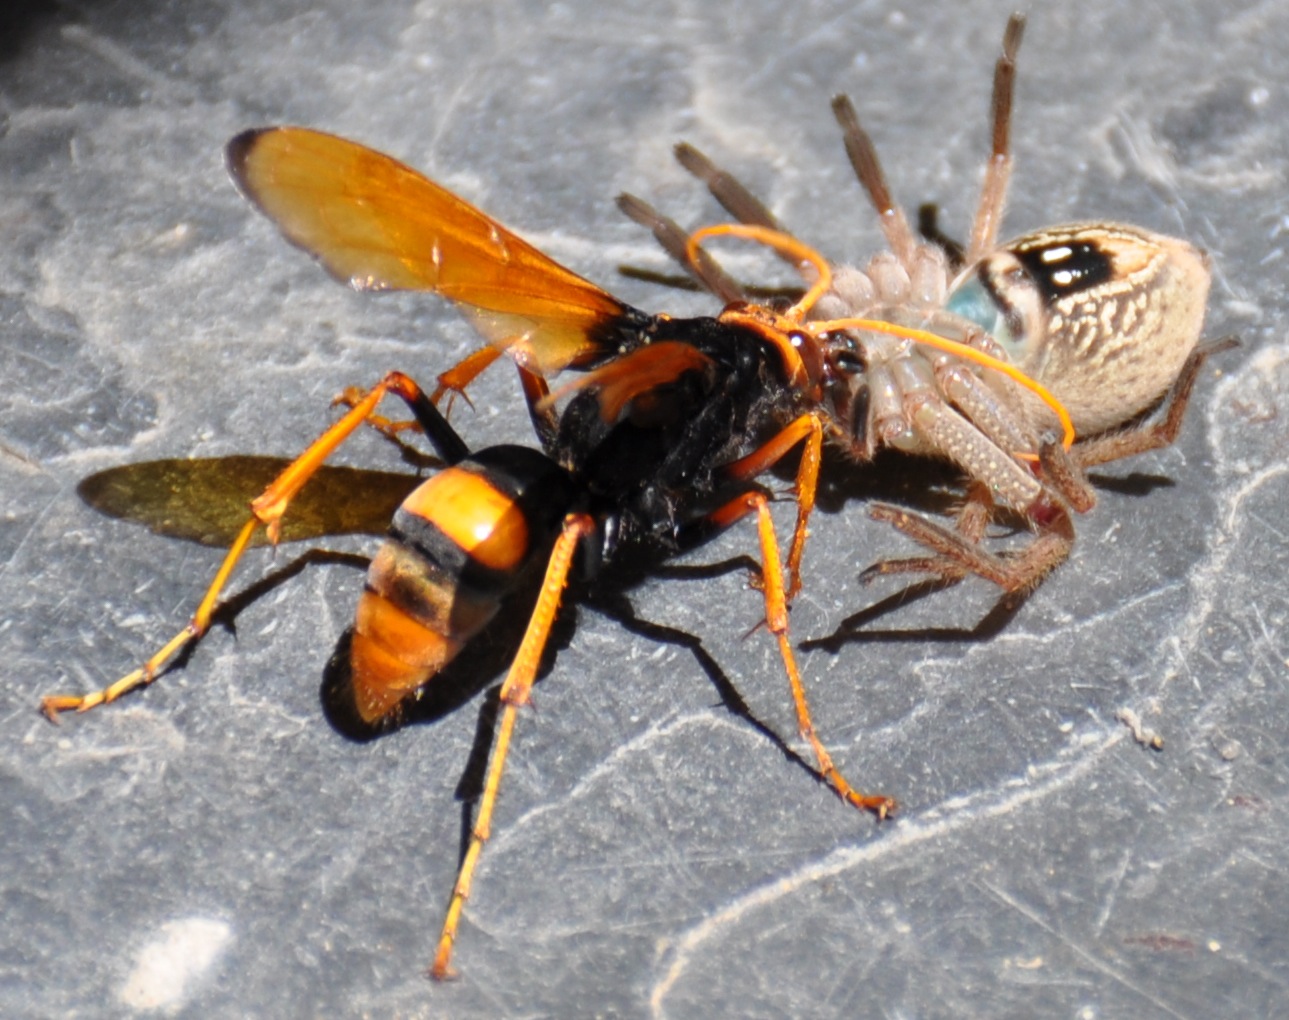     Potter wasp (Australian hornet) with a huntsman badge, which it brings back to its nest as food for its larvae. 